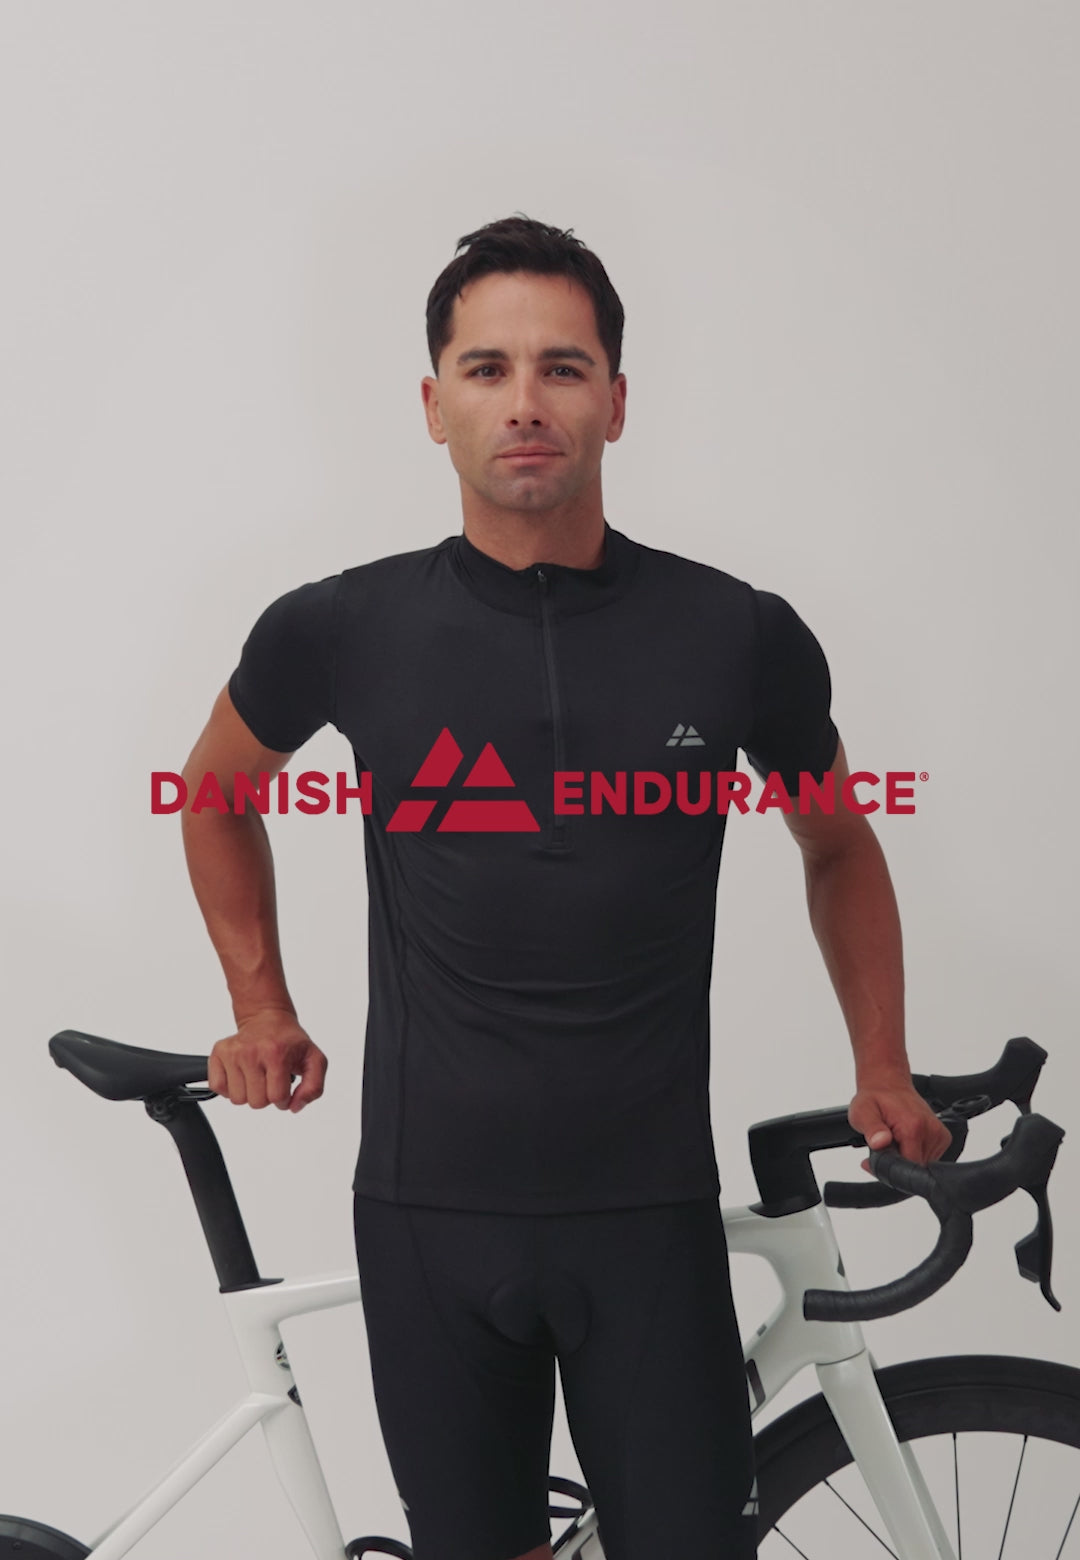 CYCLING JERSEY LONG SLEEVE FOR MEN